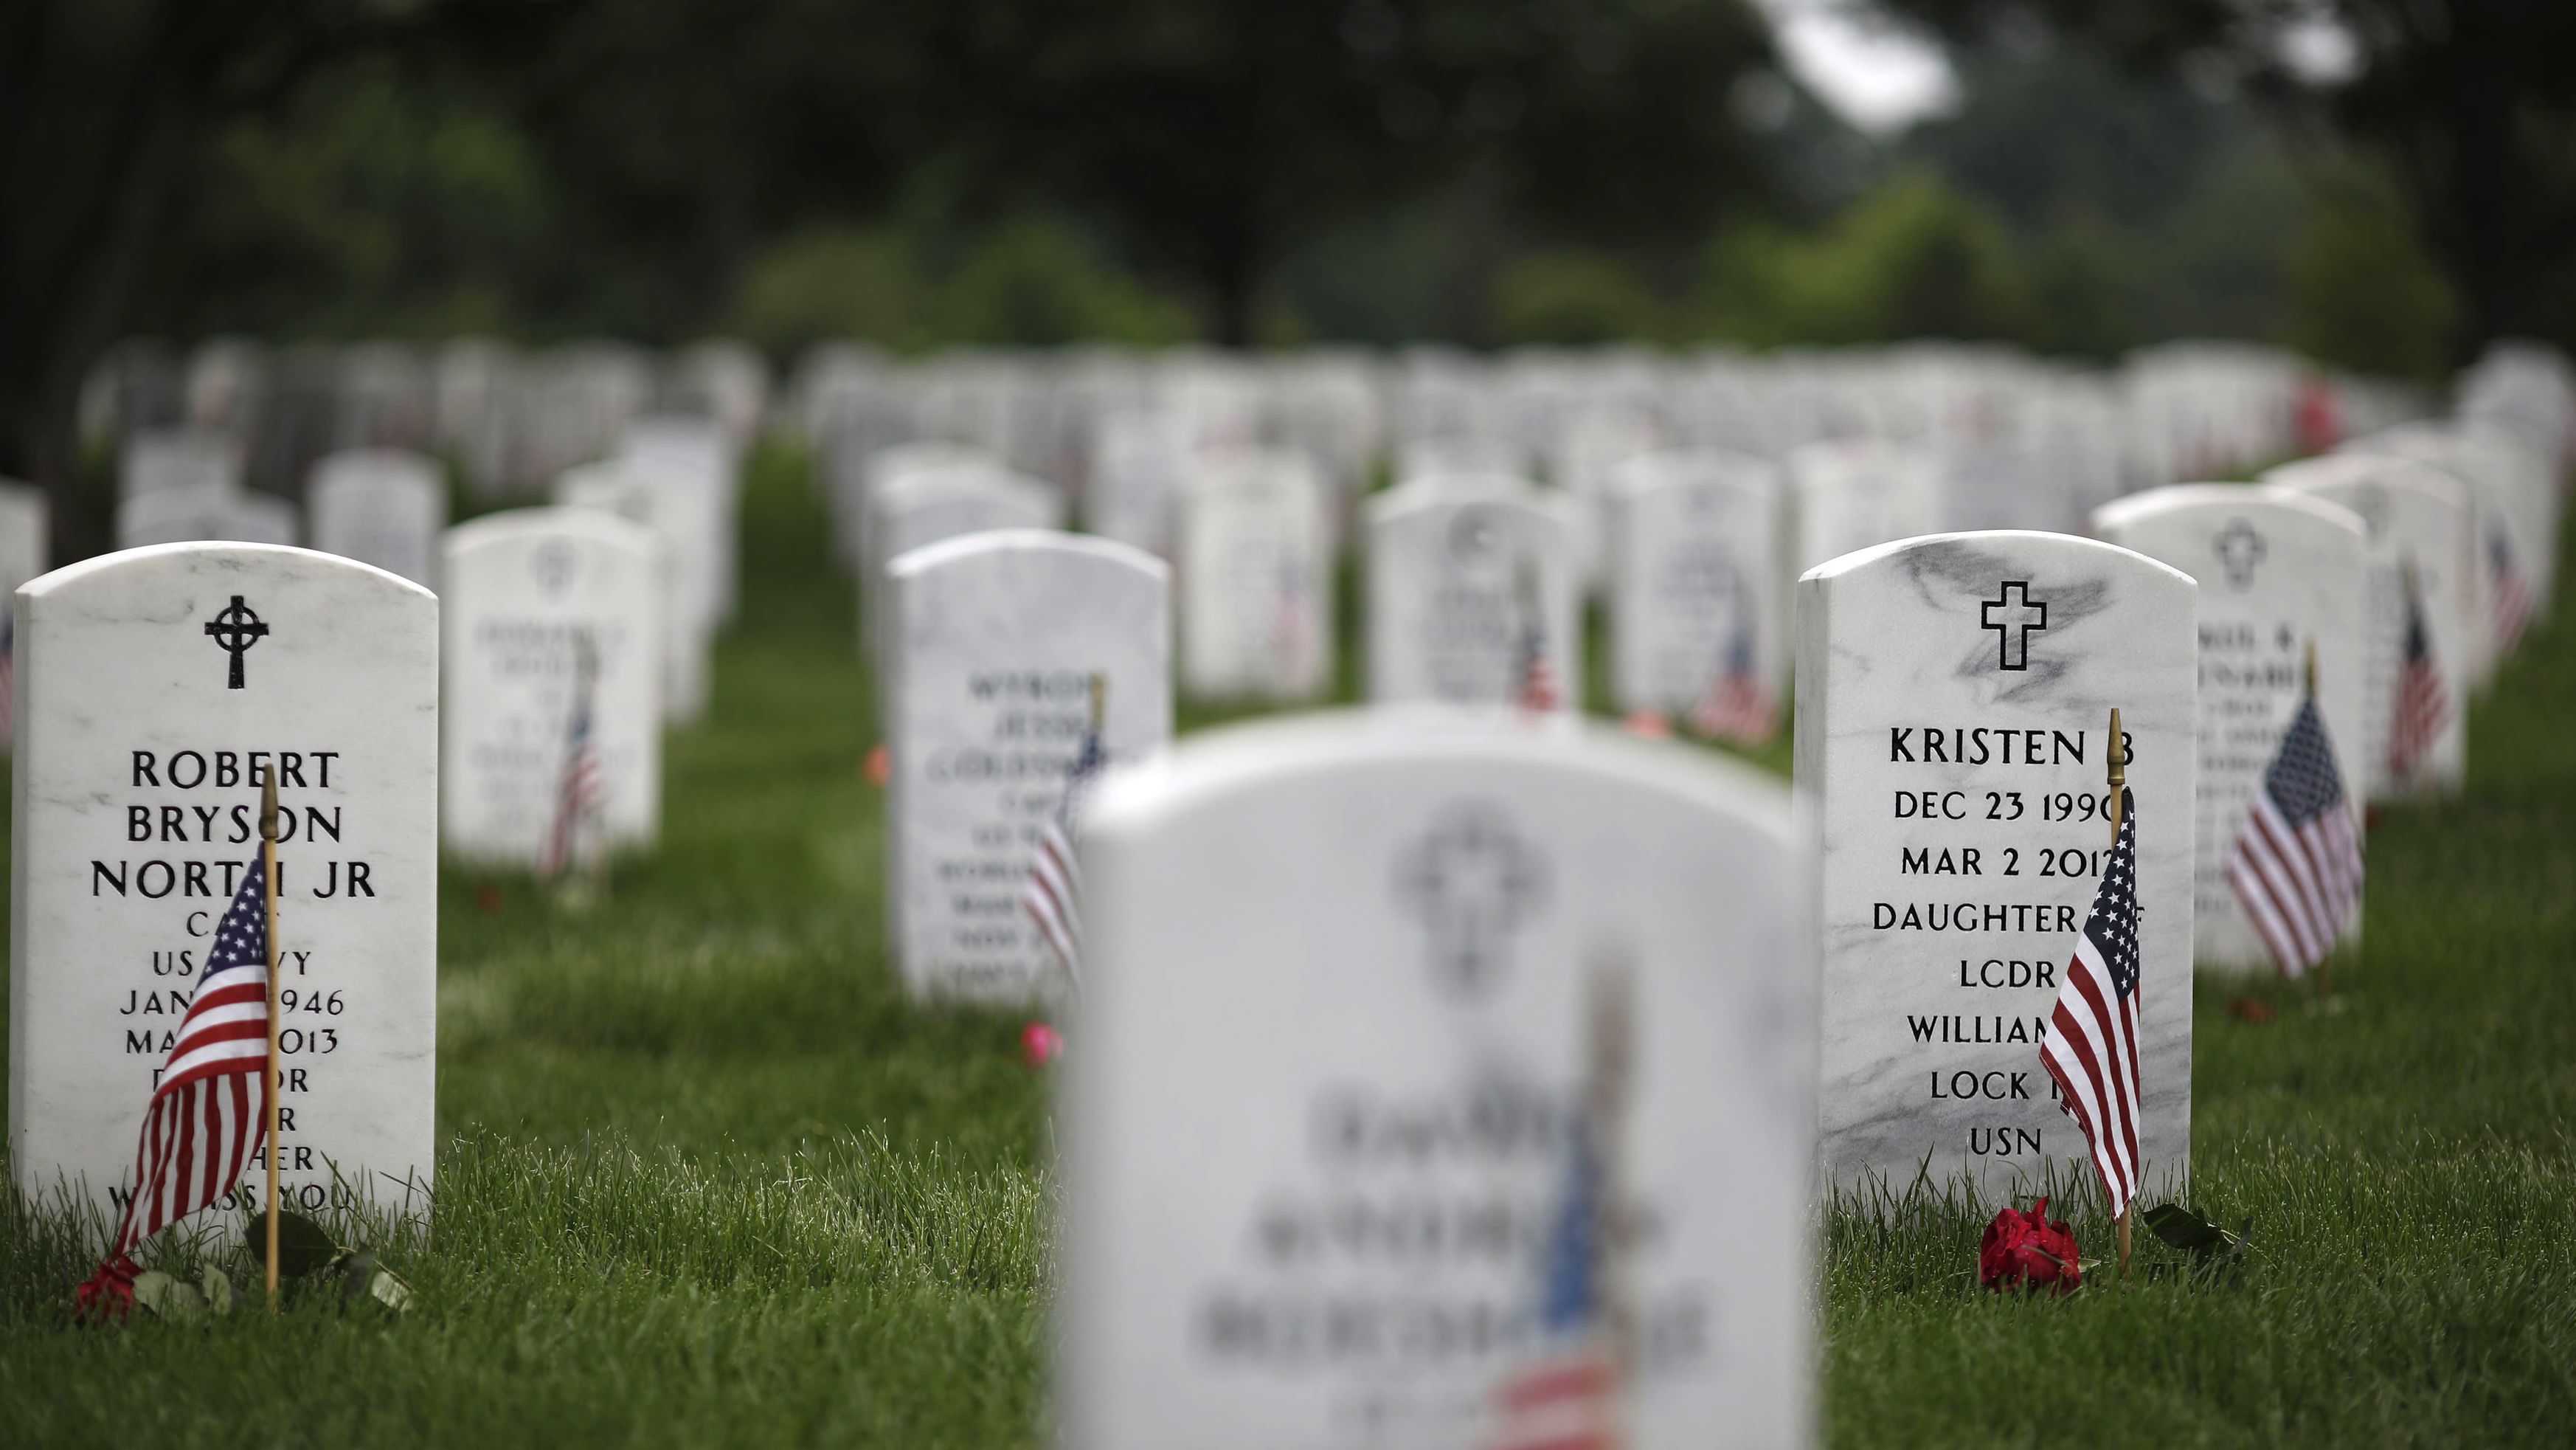  Headstones are adorned with flags at Arlington National Cemetery on Memorial Day, May 27, 2018 in Arlington, Virginia. Mourners from throughout the United States travel to Arlington to visit their loved ones on Memorial Day.